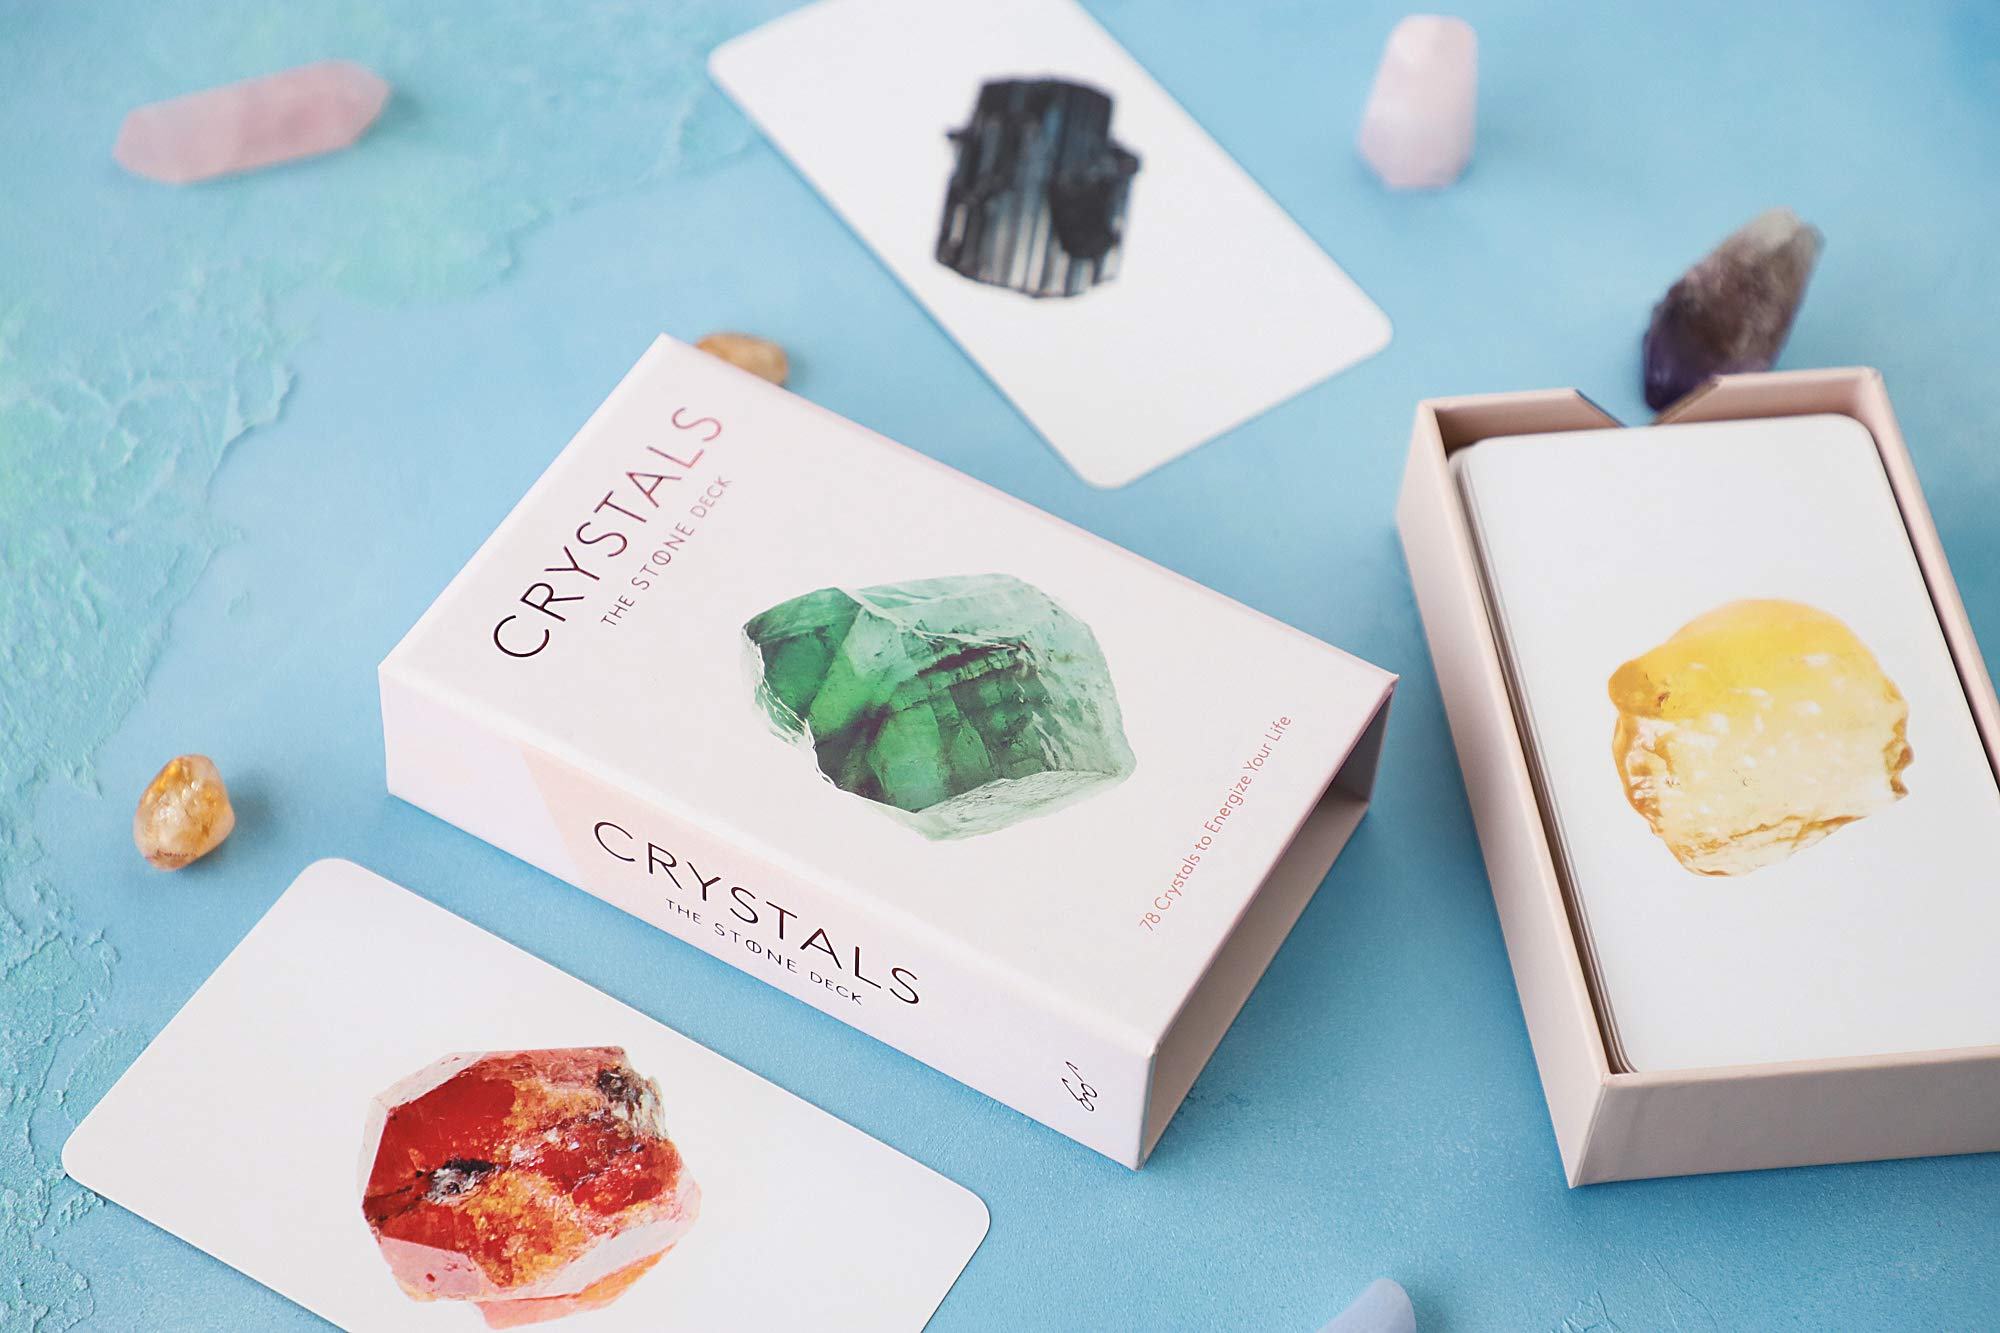 Crystals: The Stone Deck. Crystal Cards. Crystal Energy Cards. Crystal Card Per Day